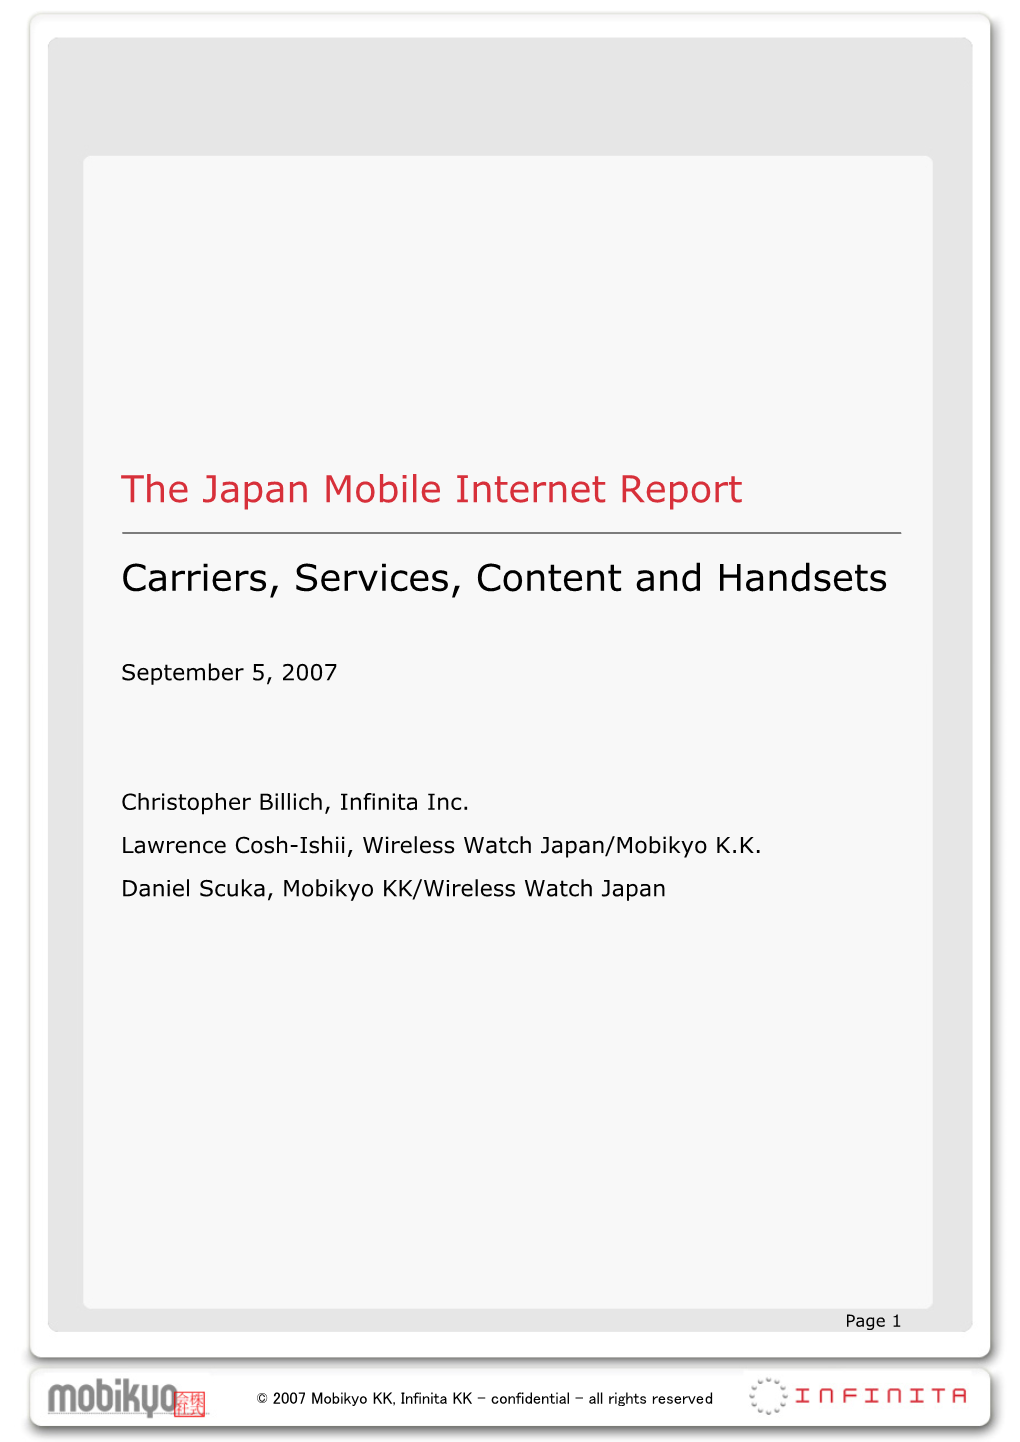 The Japan Mobile Internet Report Carriers, Services, Content And